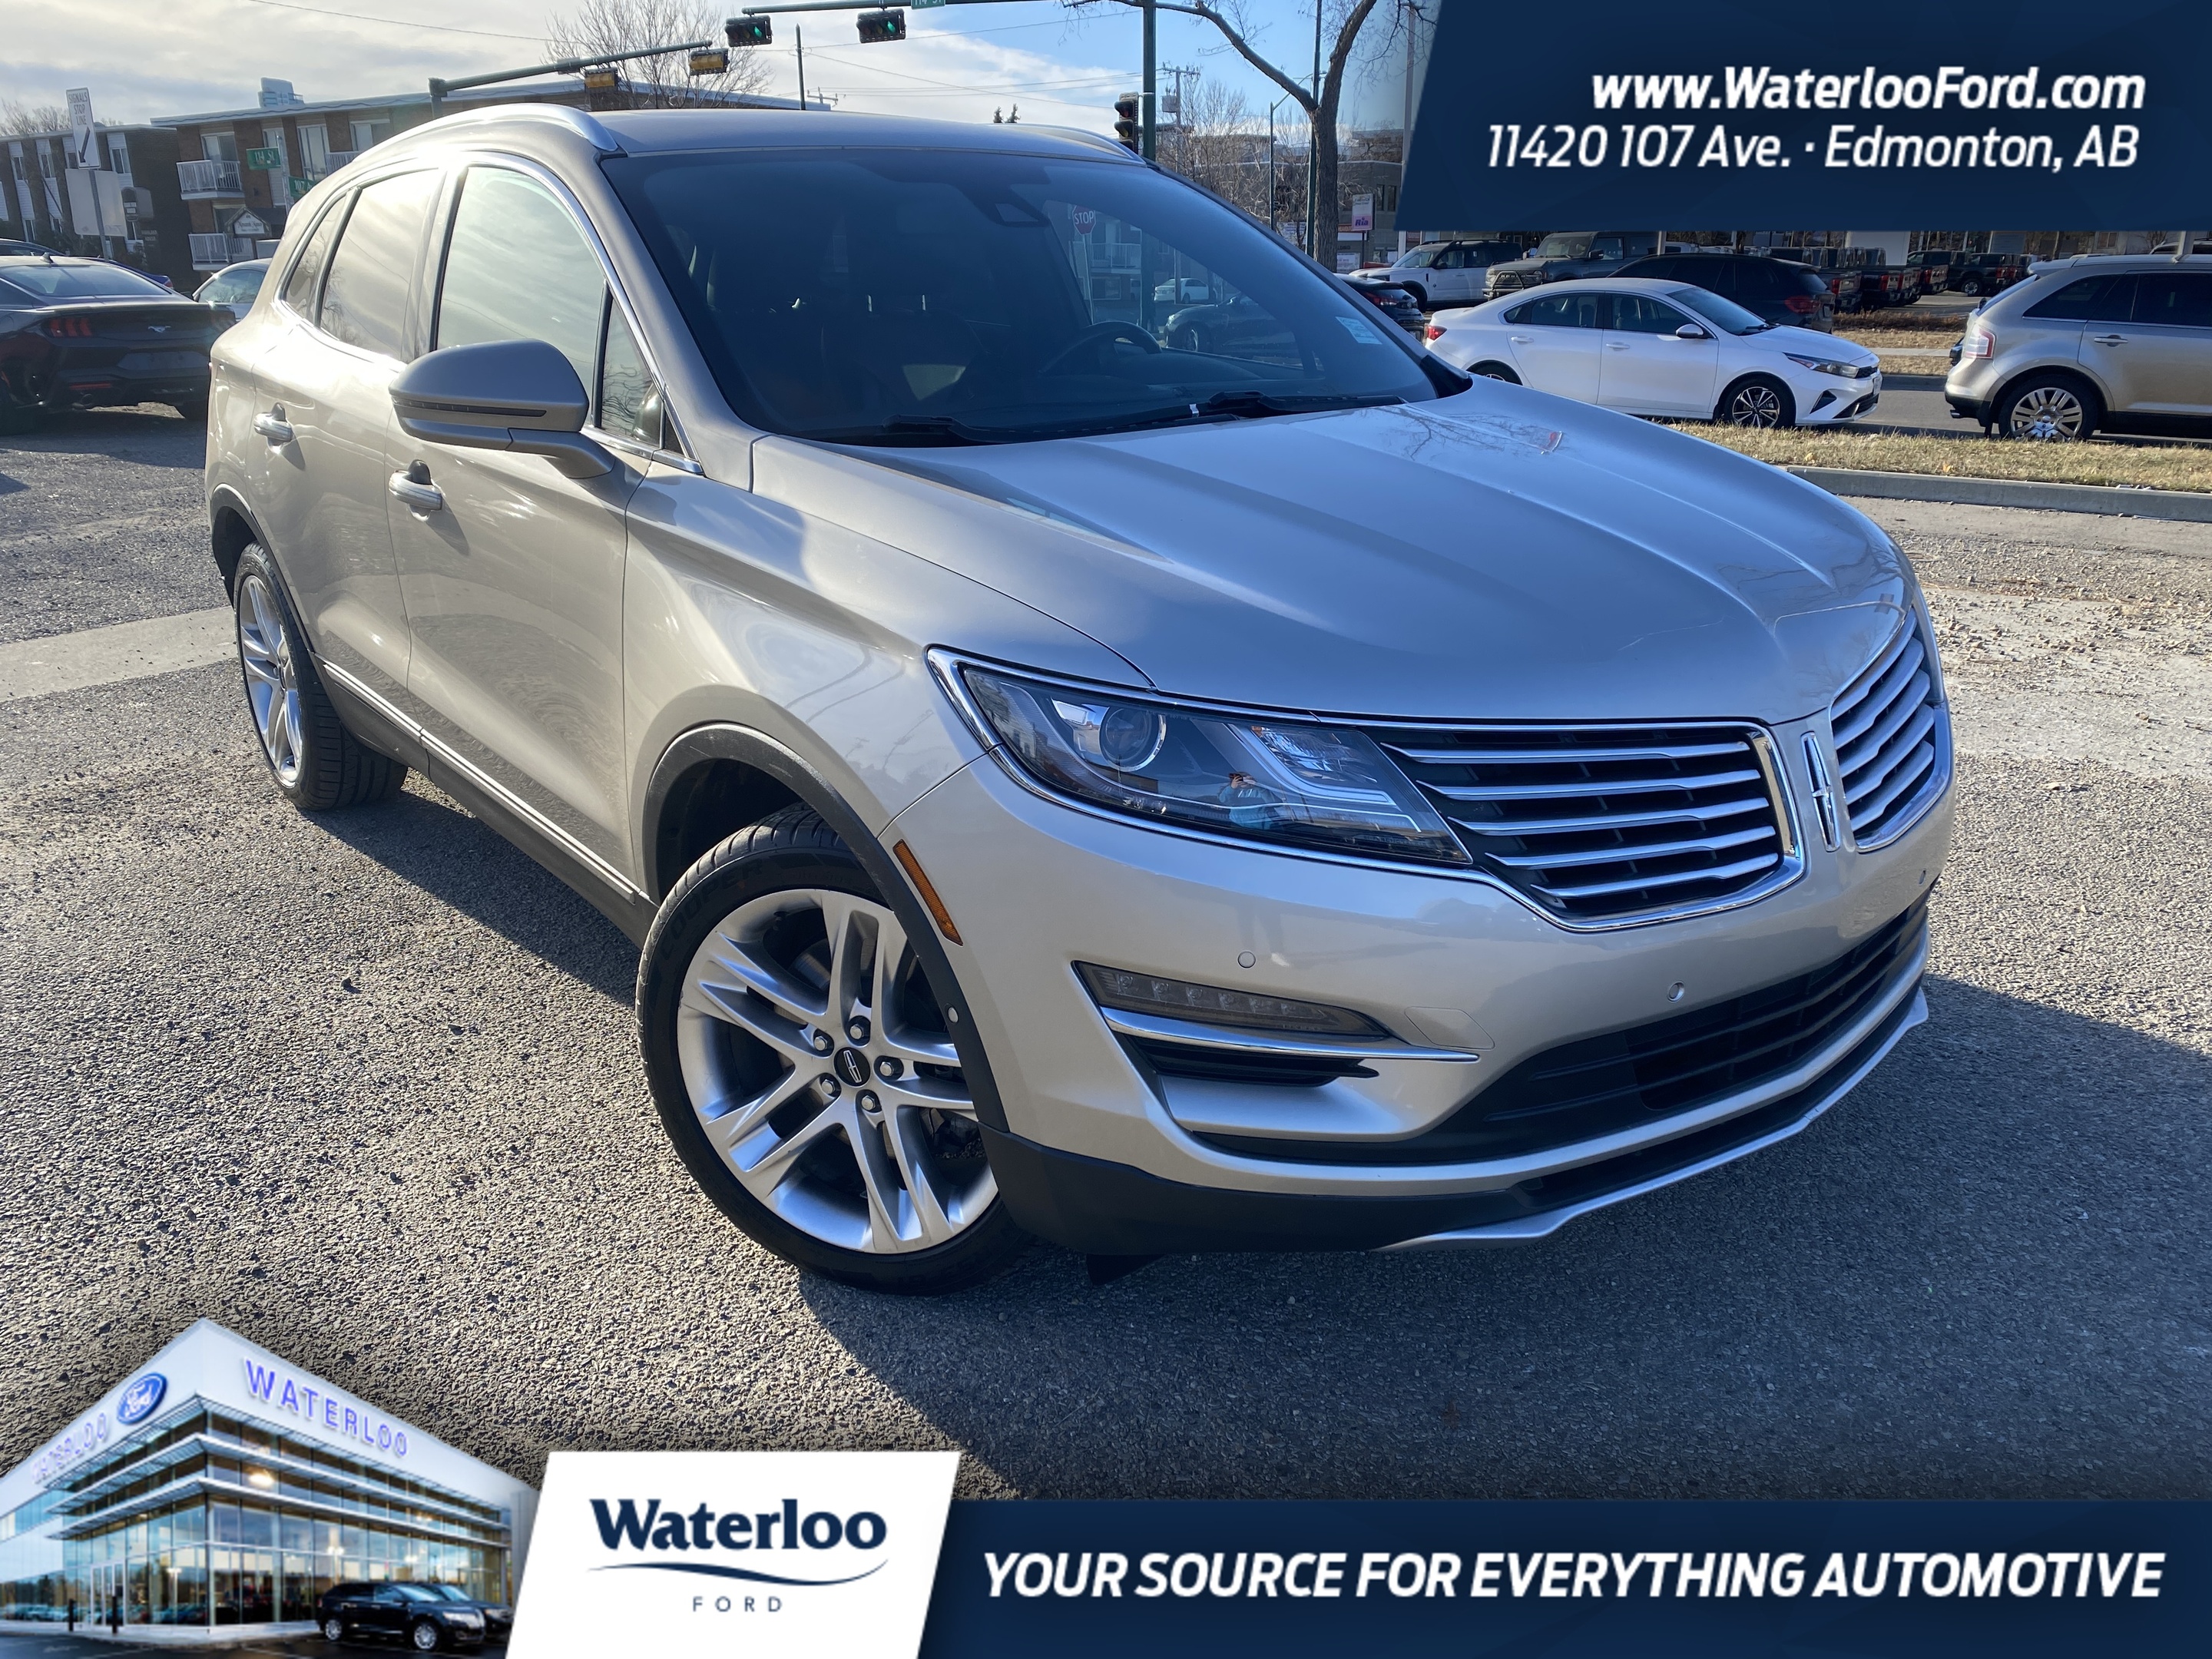 2015 Lincoln MKC Panoramic Roof | Heated/Cooled Seats | Voice Nav